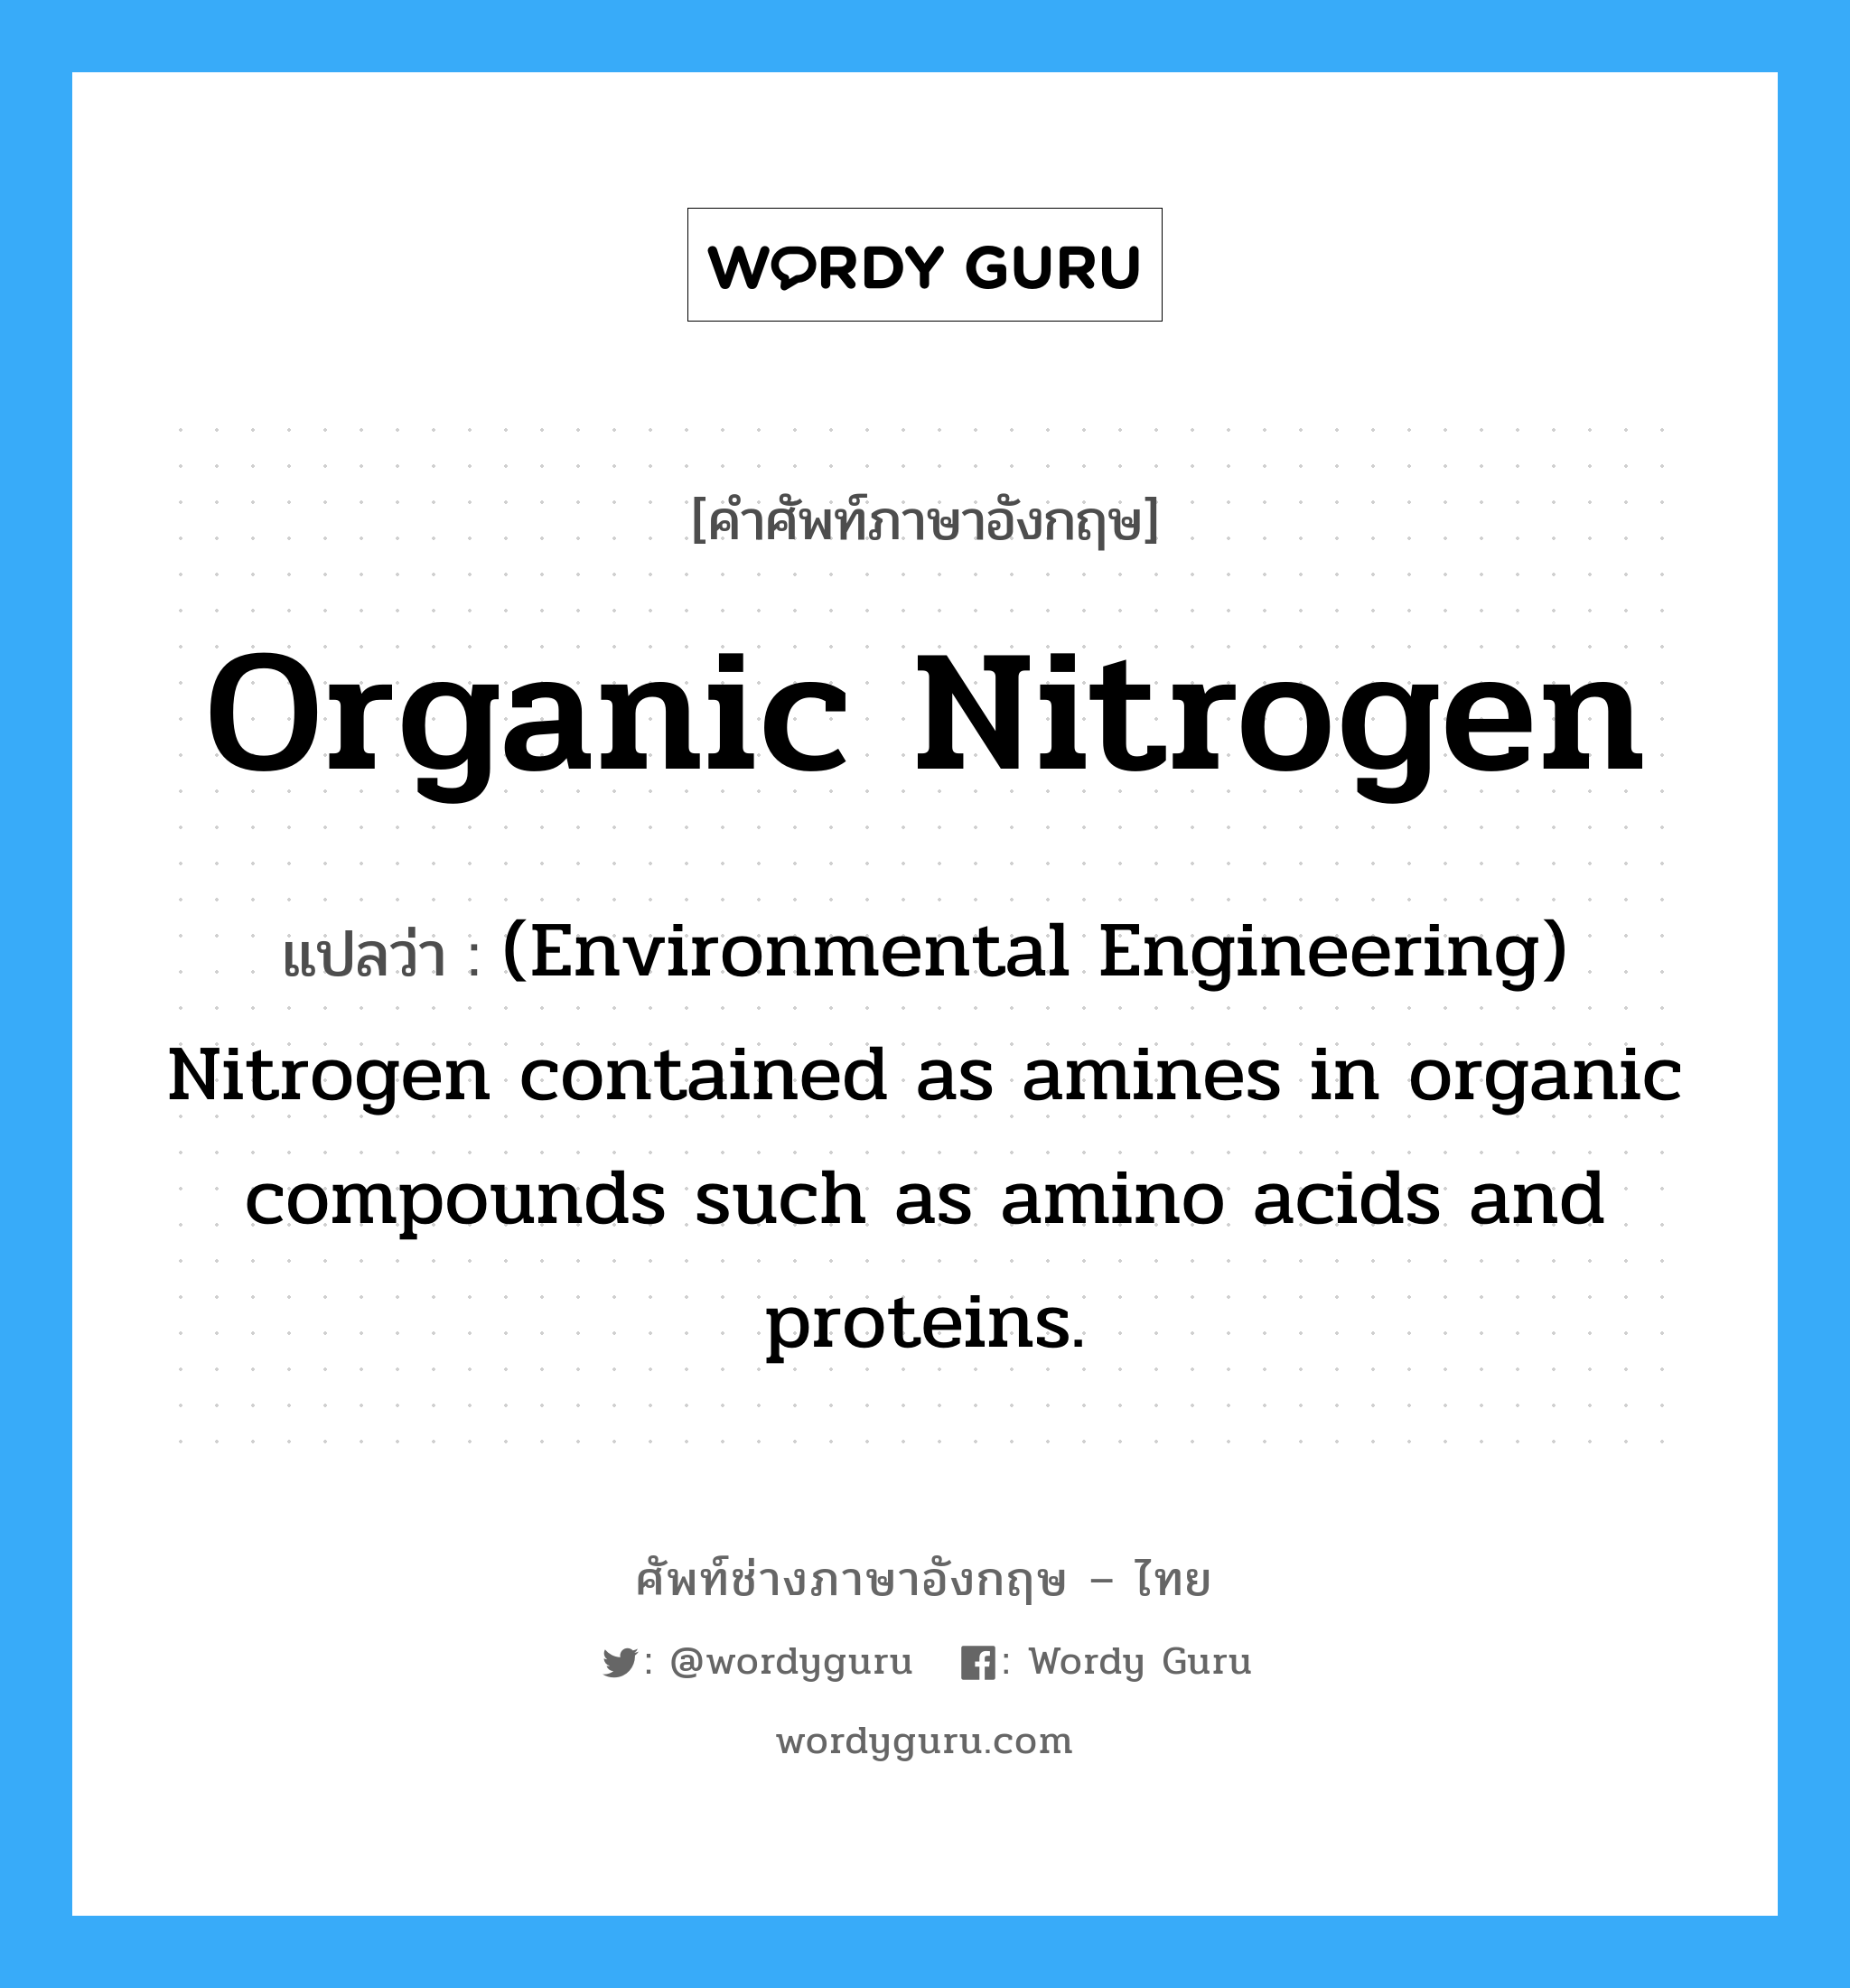 (Environmental Engineering) Nitrogen contained as amines in organic compounds such as amino acids and proteins. ภาษาอังกฤษ?, คำศัพท์ช่างภาษาอังกฤษ - ไทย (Environmental Engineering) Nitrogen contained as amines in organic compounds such as amino acids and proteins. คำศัพท์ภาษาอังกฤษ (Environmental Engineering) Nitrogen contained as amines in organic compounds such as amino acids and proteins. แปลว่า Organic nitrogen